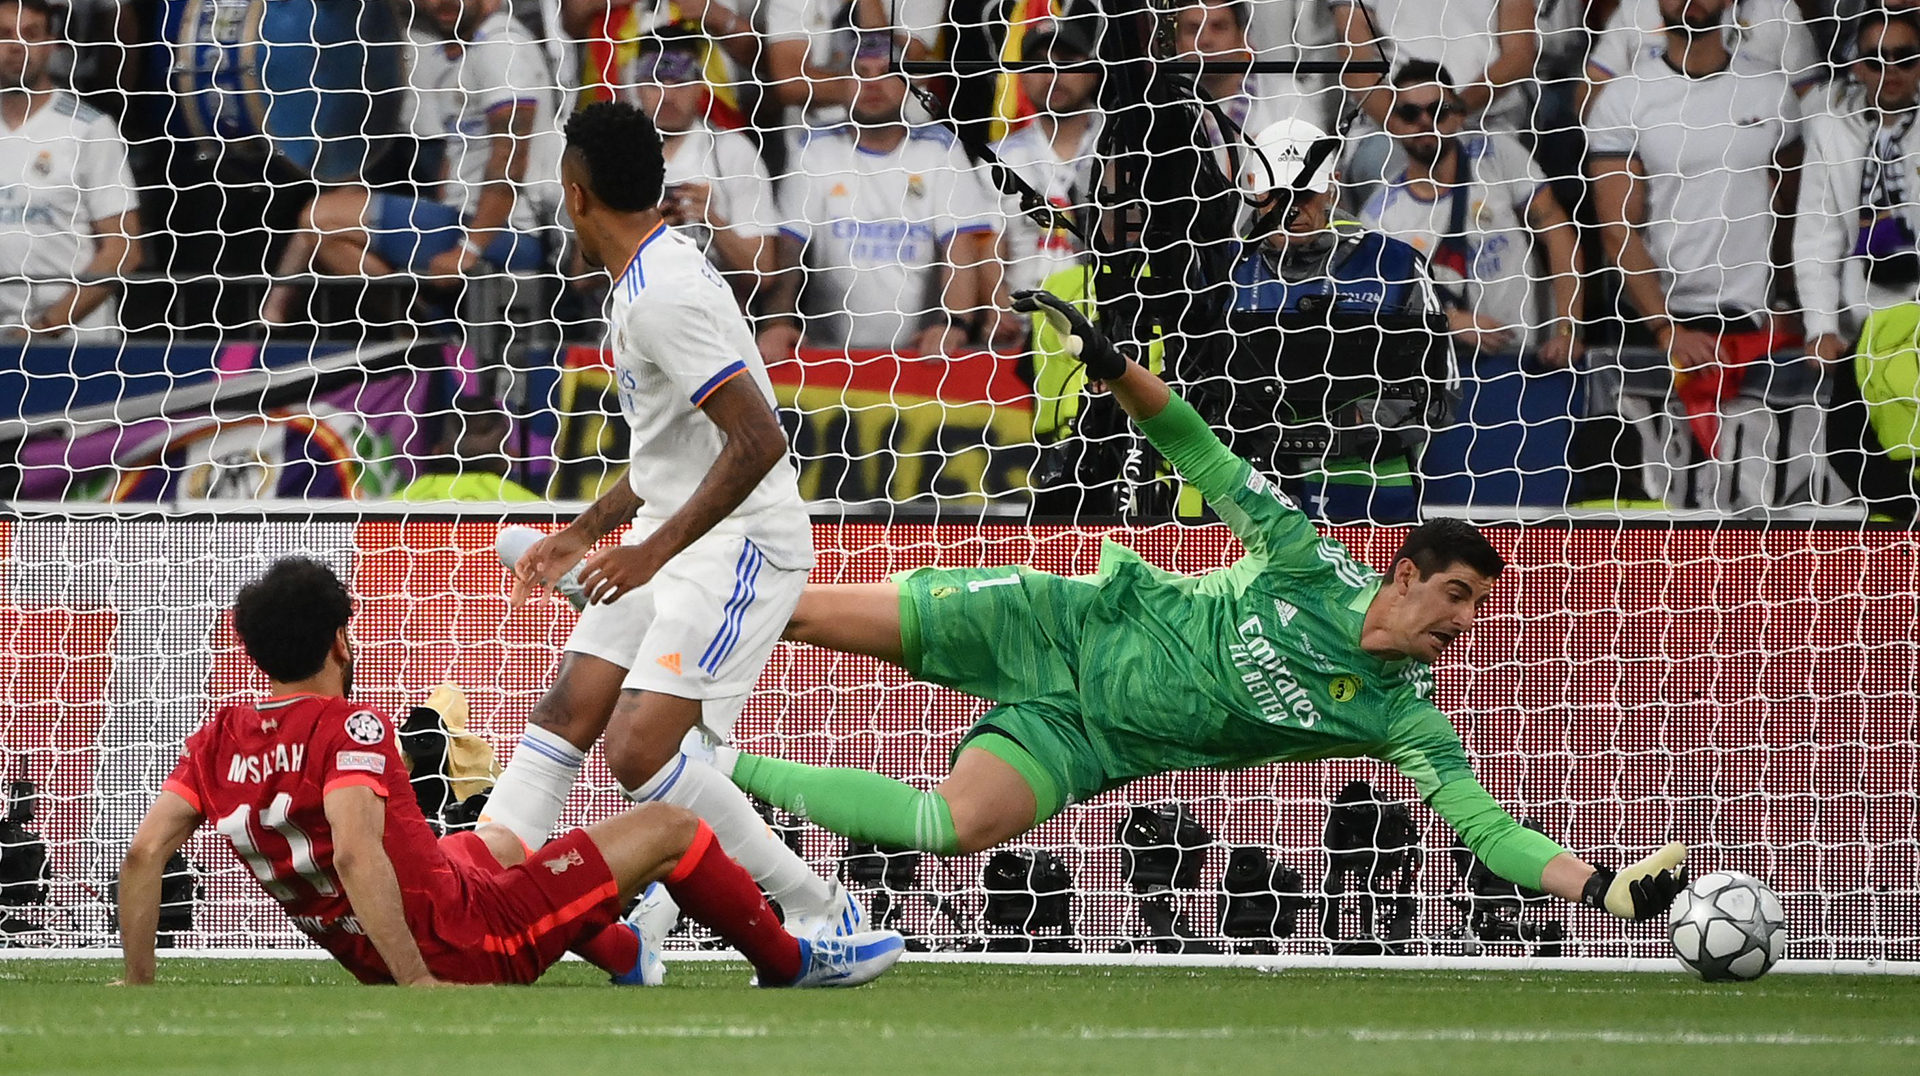 Real Madrid's Belgian goalkeeper Thibaut Courtois (R) makes a save from an attempt by Liverpool's Egyptian midfielder Mohamed Salah (L) during the UEFA Champions League final football match between Liverpool and Real Madrid at the Stade de France in Saint-Denis, north of Paris, on May 28, 2022.